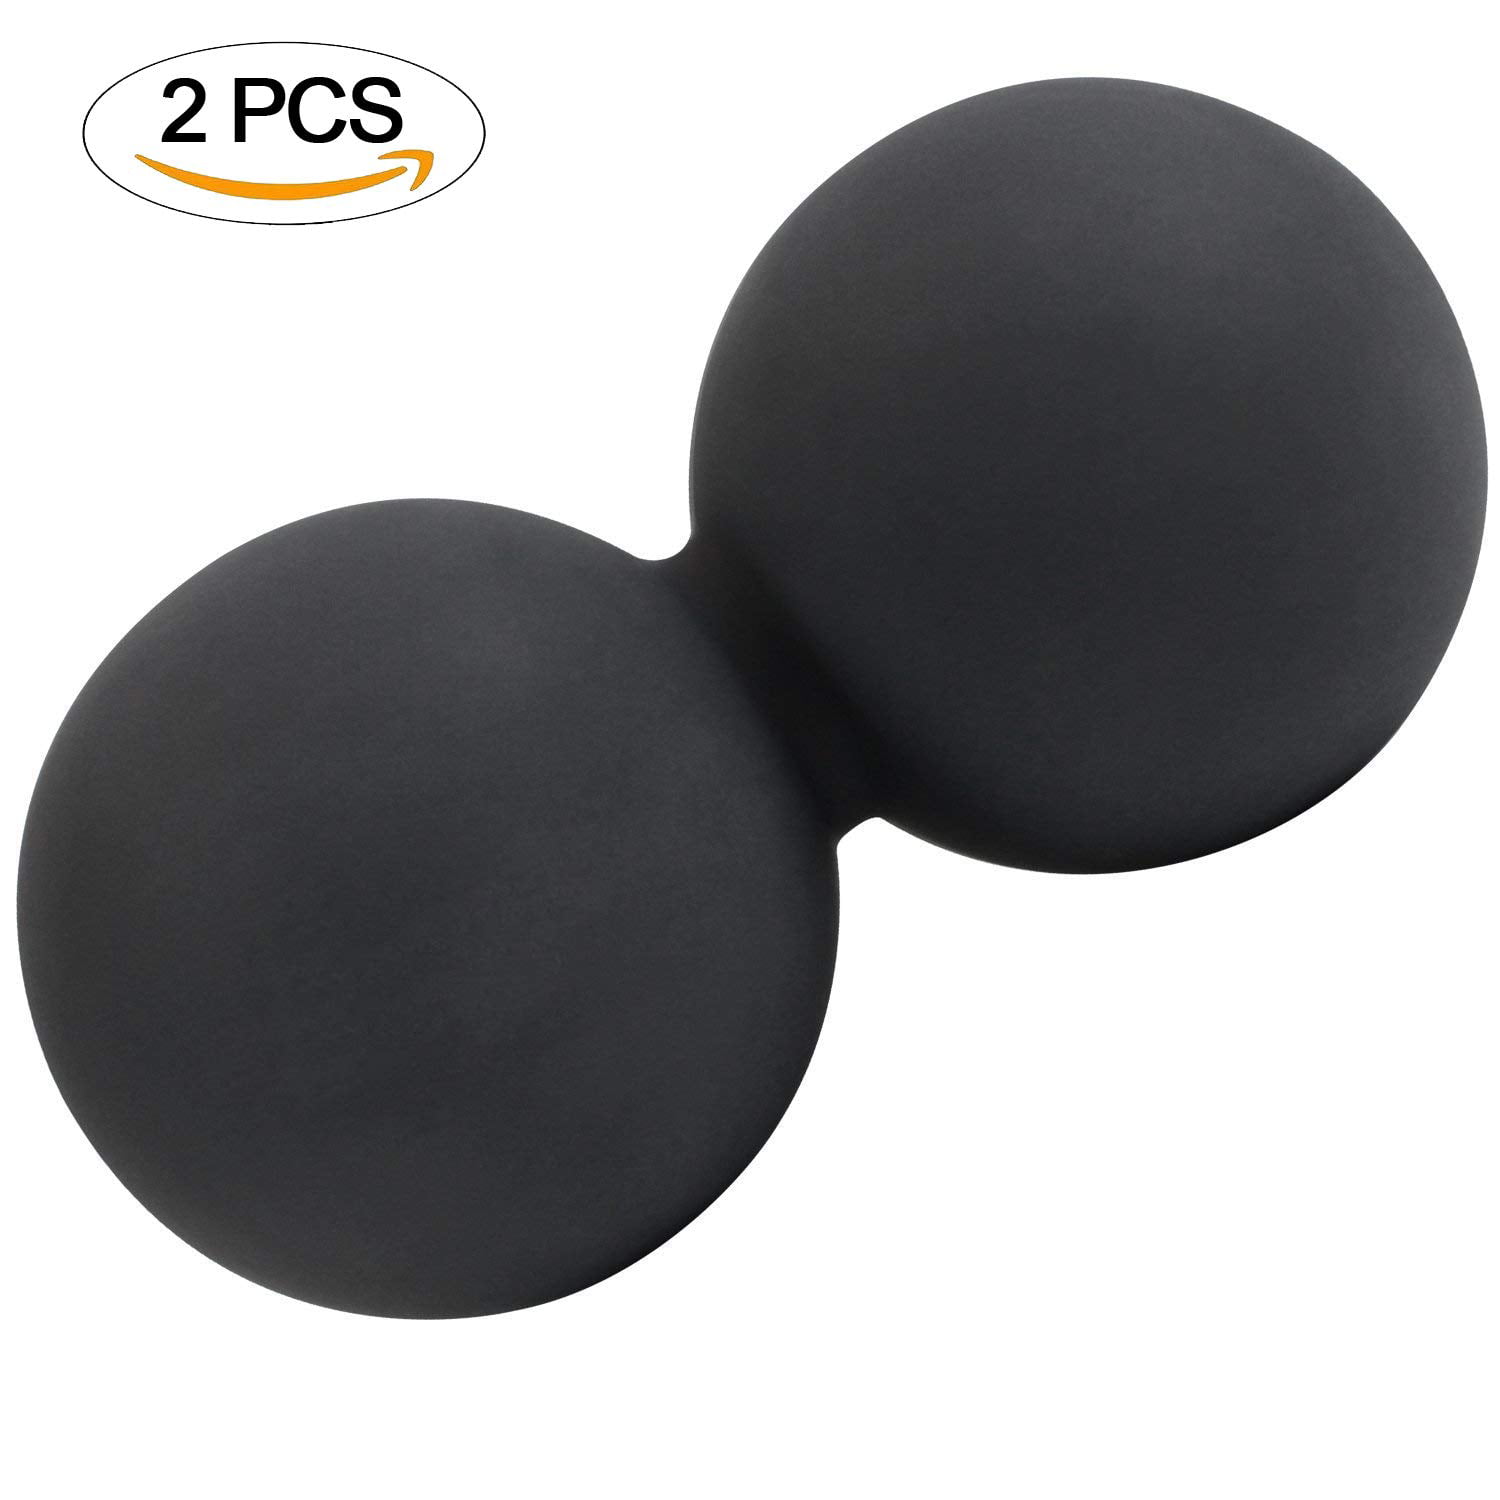 5BILLION Double Massage Ball Double Lacrosse Ball Foot Deep Tissue Massage Tool for Back Neck Therapy Peanut Ball Stress Ball